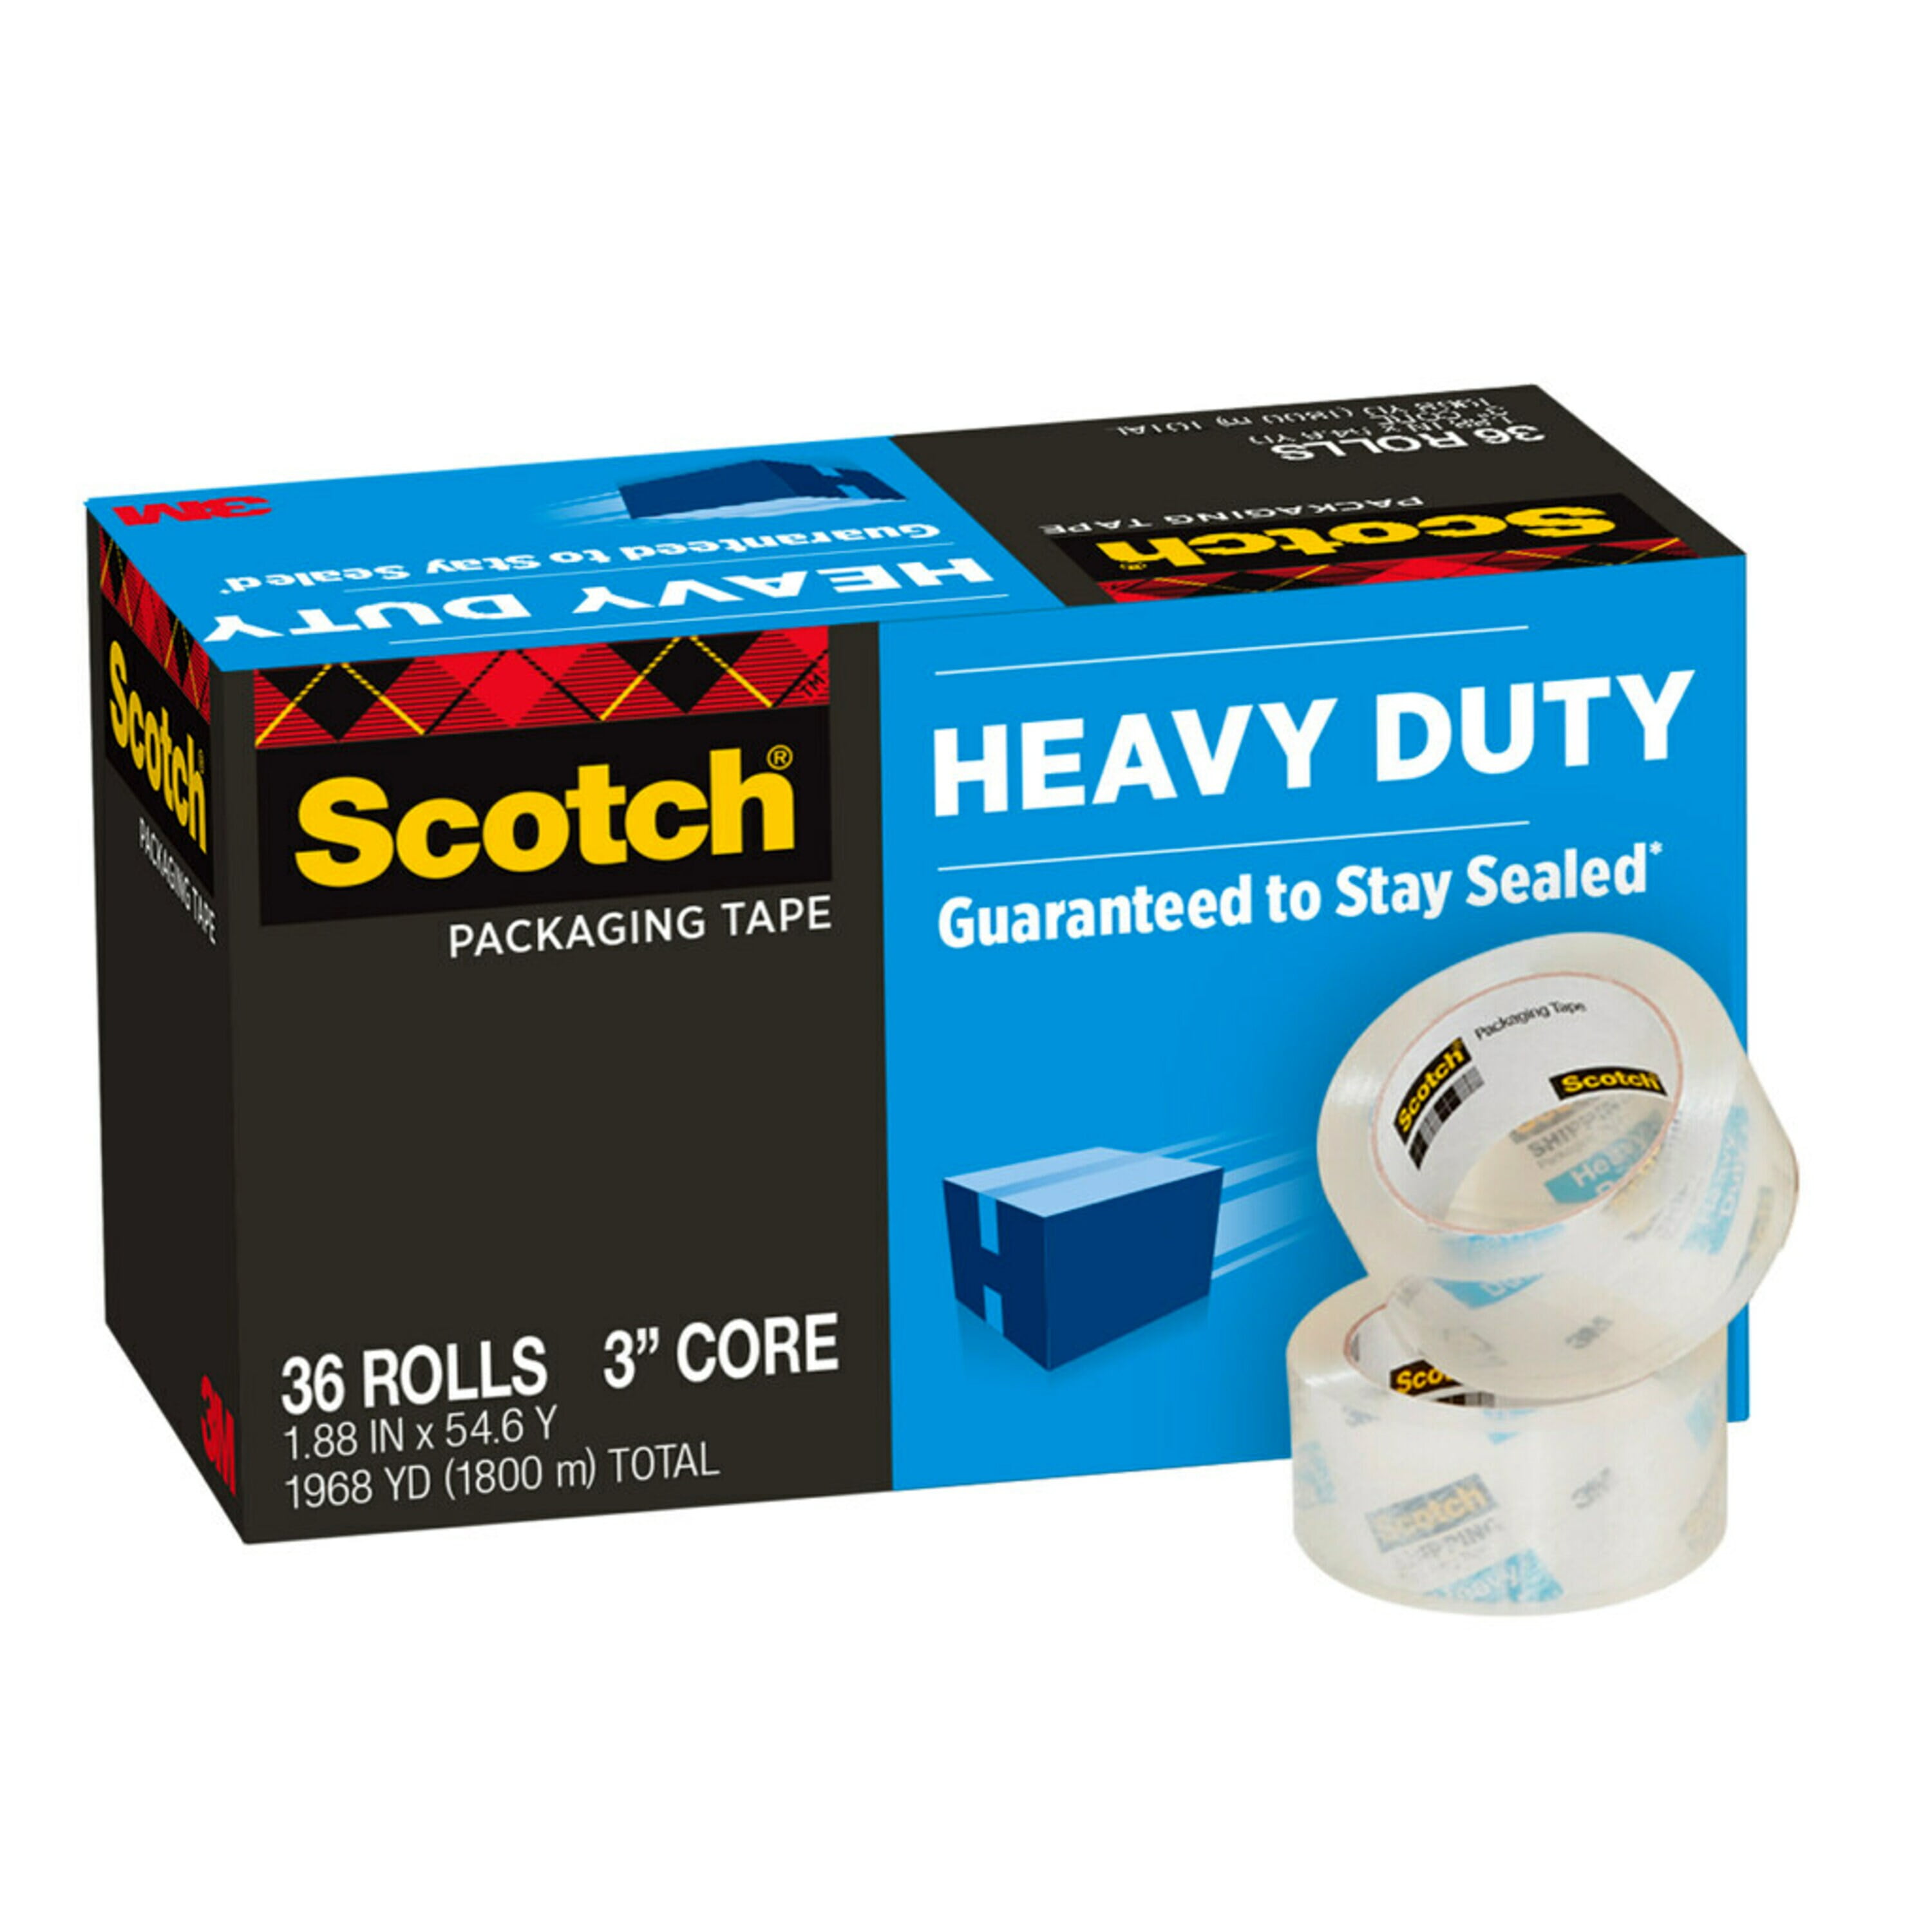 Scotch® Light Duty Packaging Tape 600 Clear High Clarity, 1in x 72 yd, 4  rolls per pack 9 packs per case Conveniently Packaged - The Binding Source